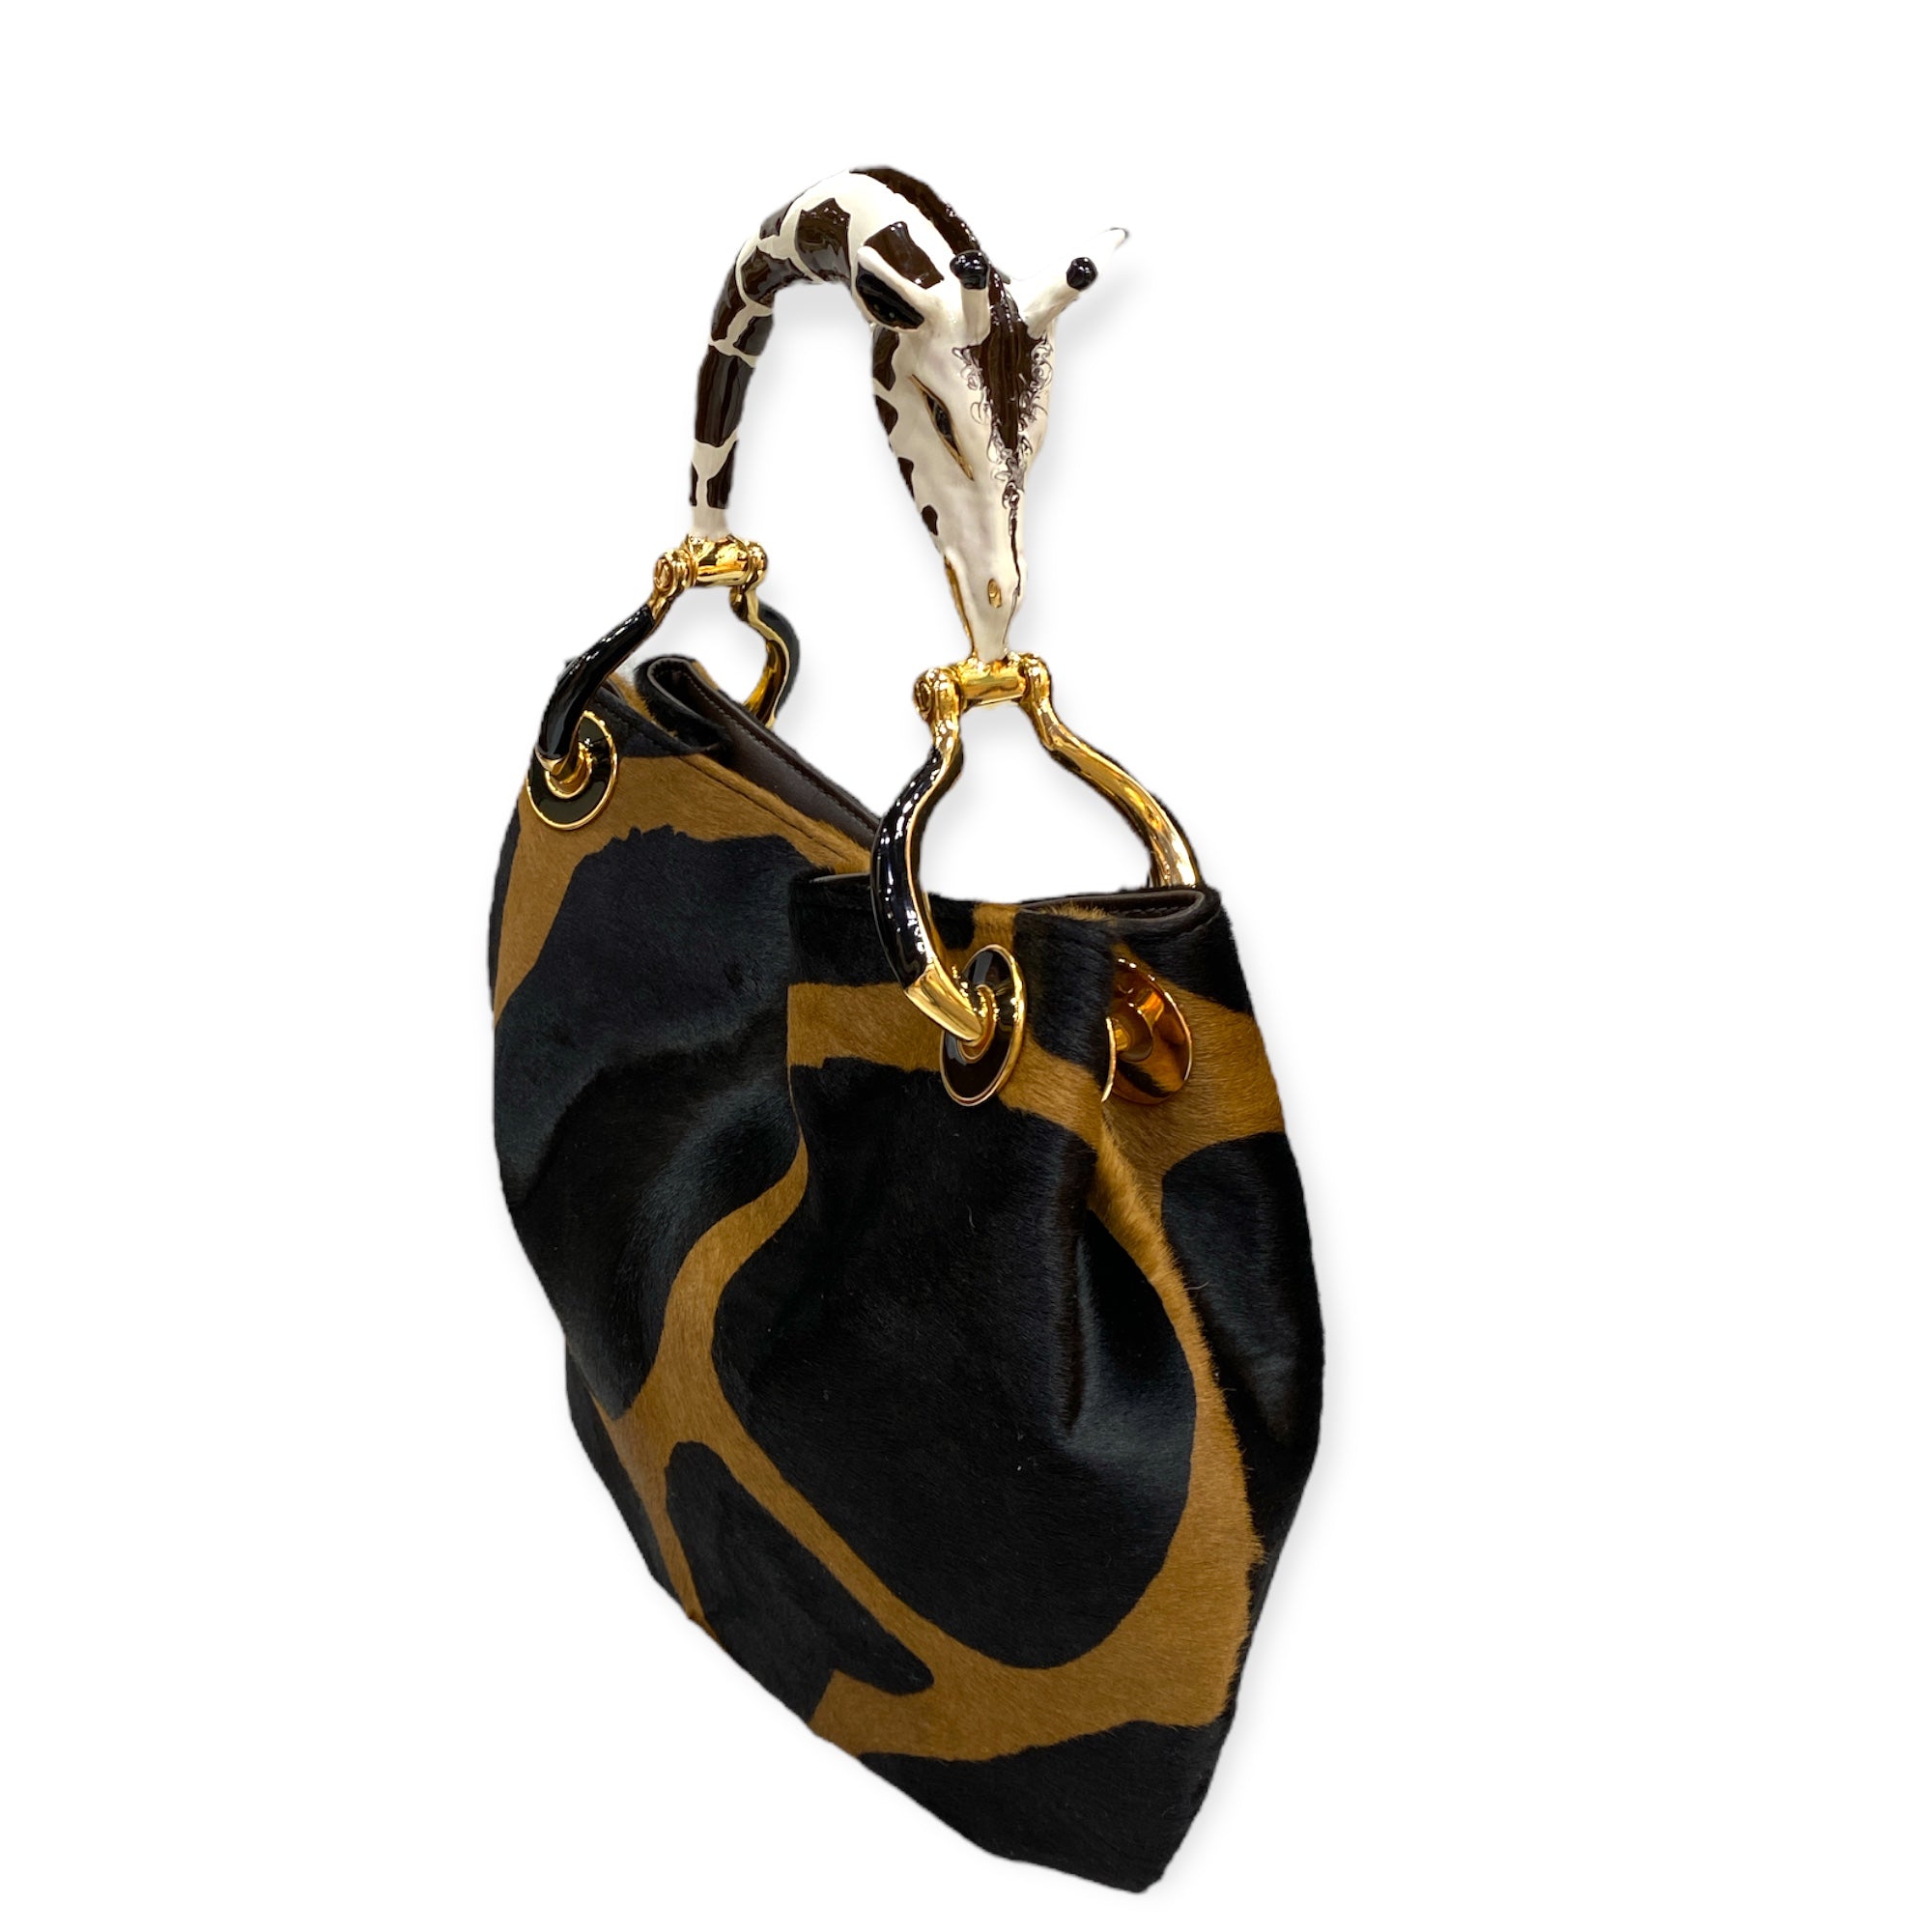 LUXURY HANDBAGS COLLECTION Creart2 Made in Italy Precious handbag made in Italy with fine accessories made in polychrome enamels and exclusive hides, every bag is the result of an accurate handcraft manufacture that makes it unique. The "sculpture" handle is made of metal with 24 Kt Gold Plated parts and the enamel is…